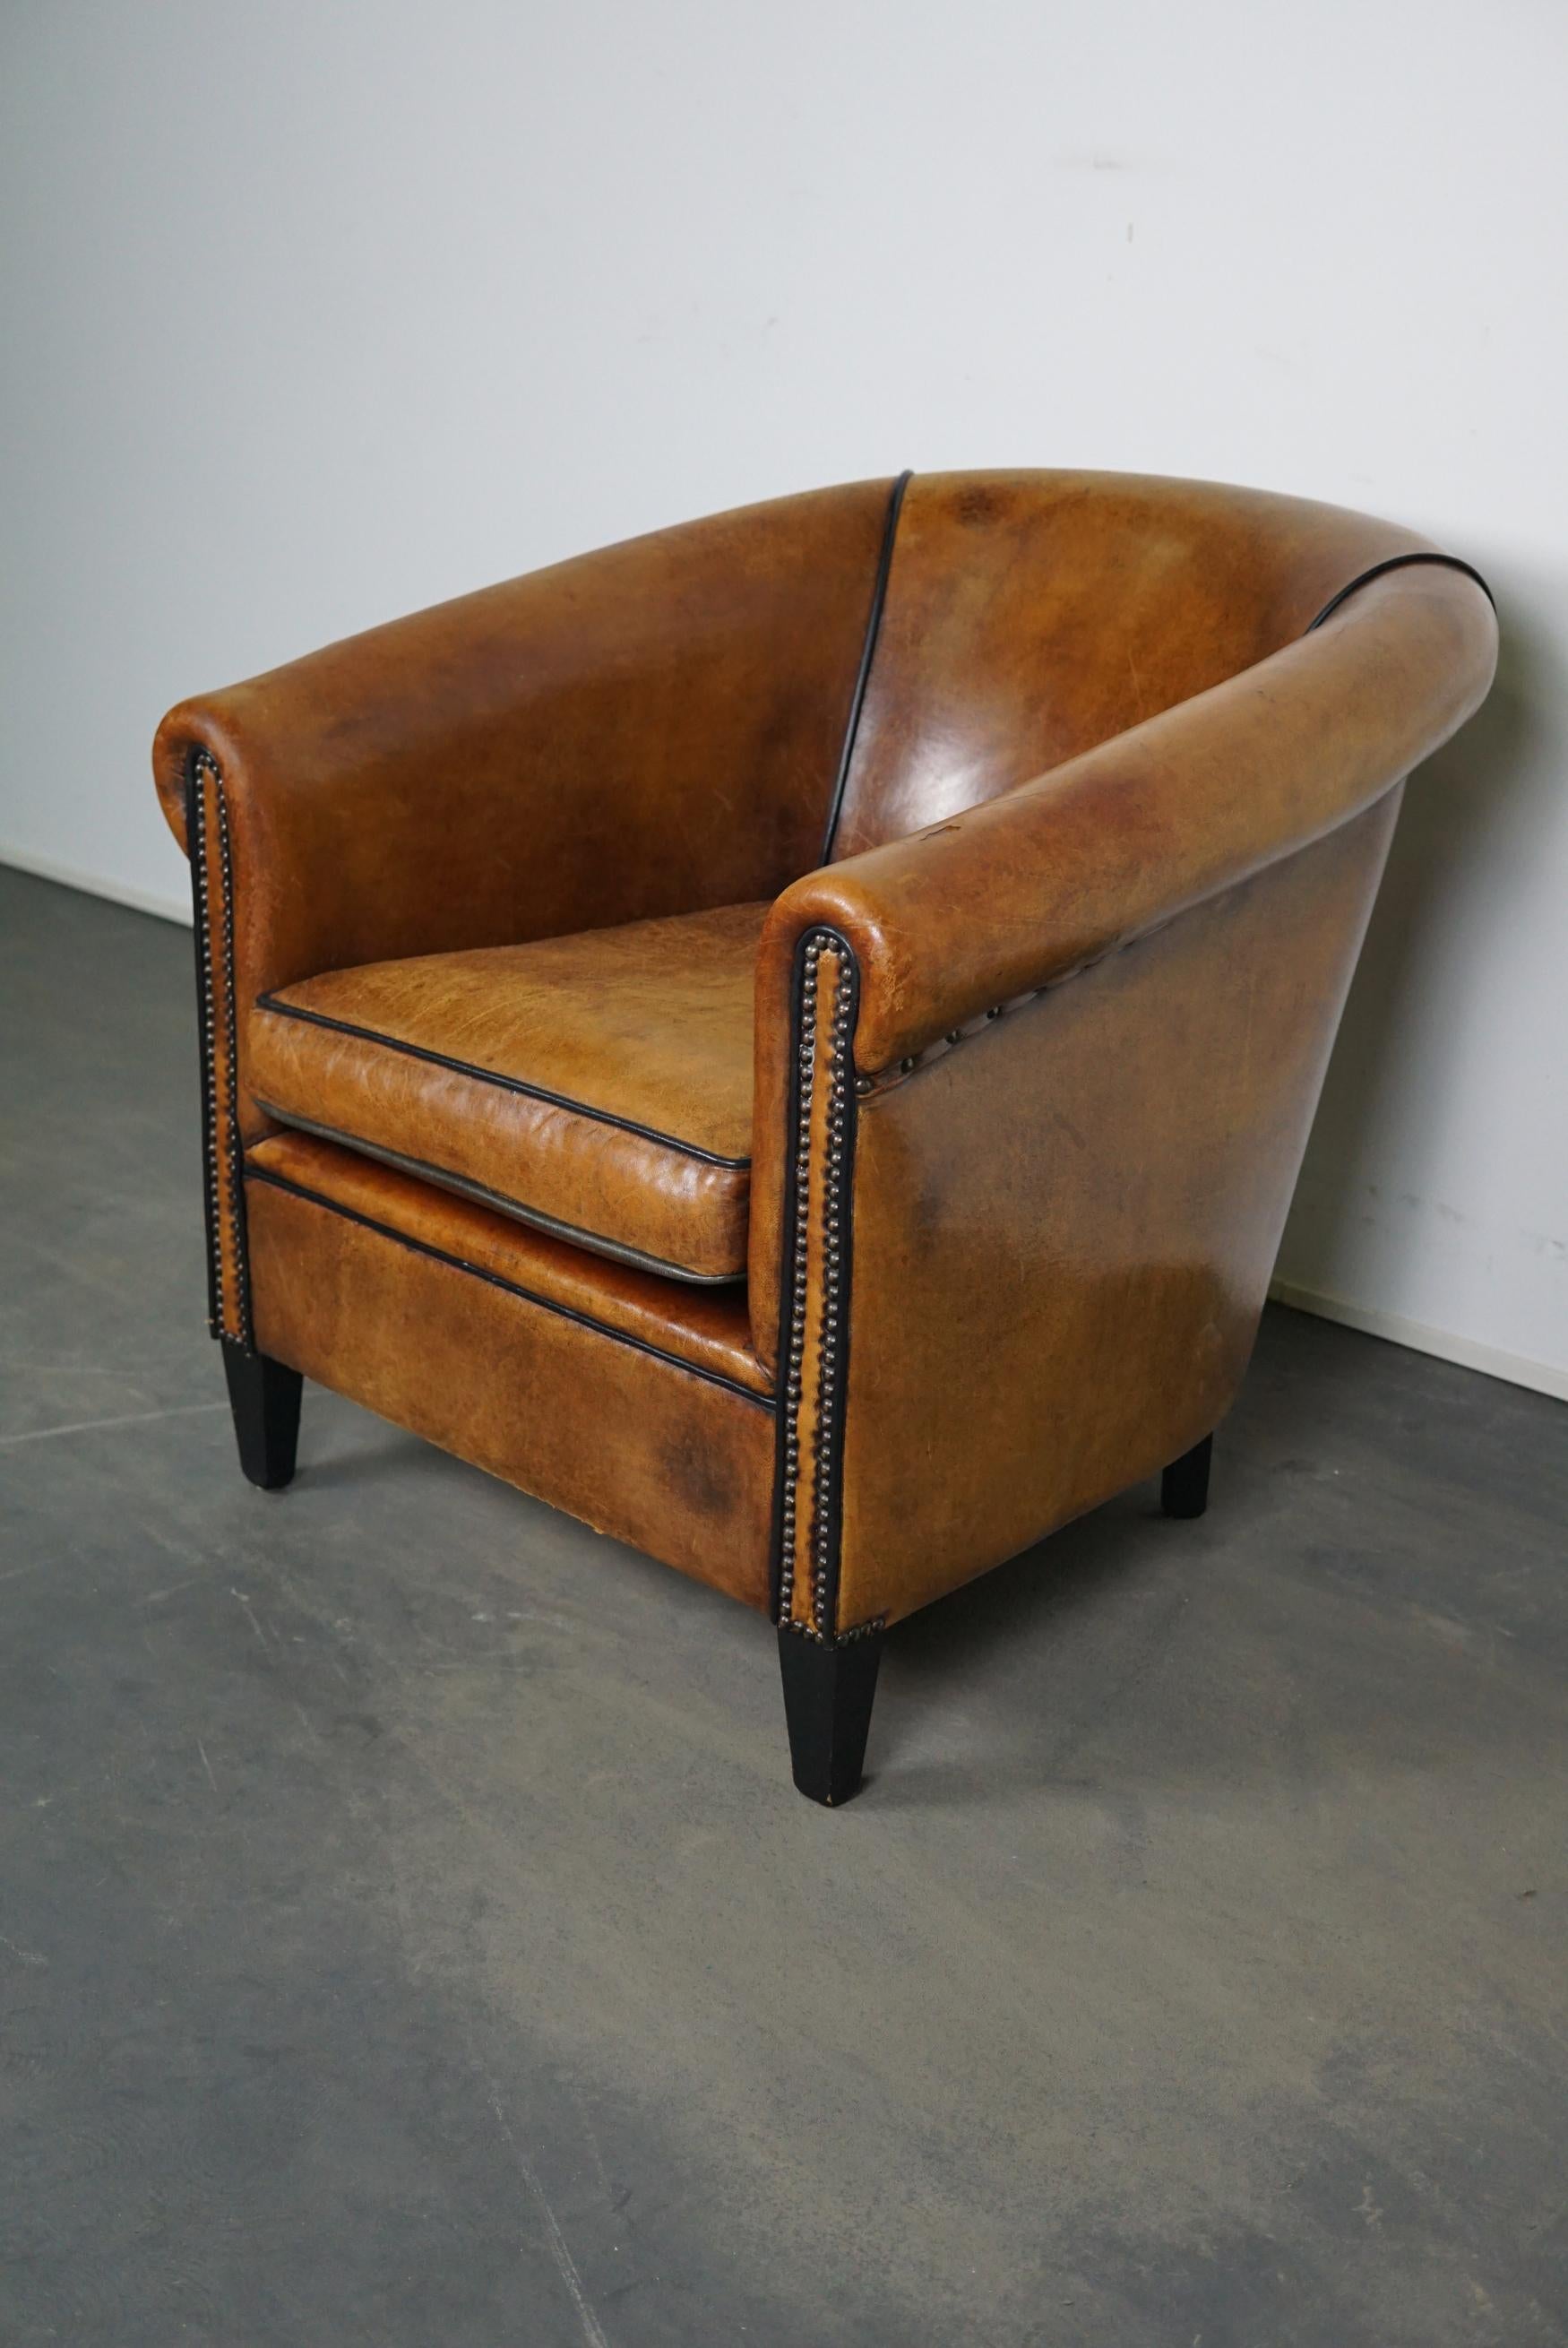 Late 20th Century Vintage Dutch Cognac-Colored Leather Club Chair